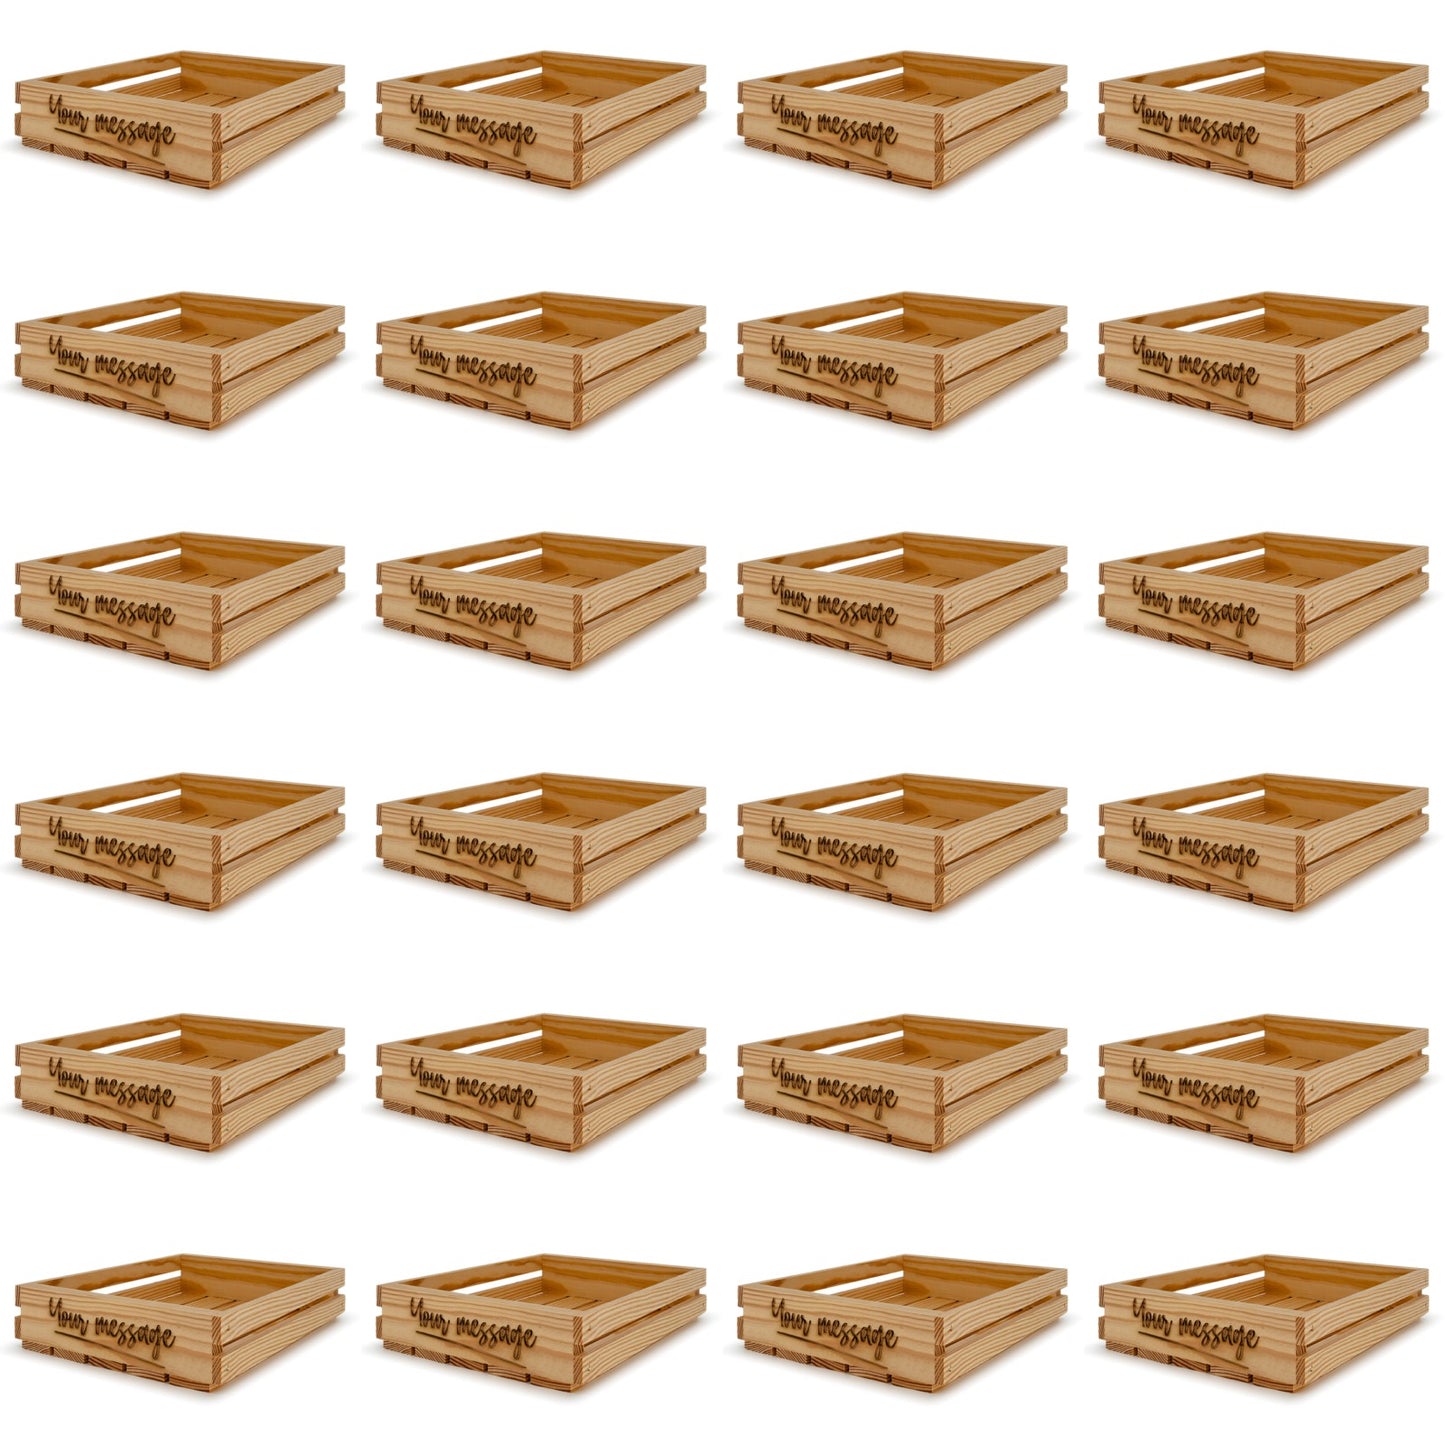 24 Small wooden crates 12x10x2.5 your message included